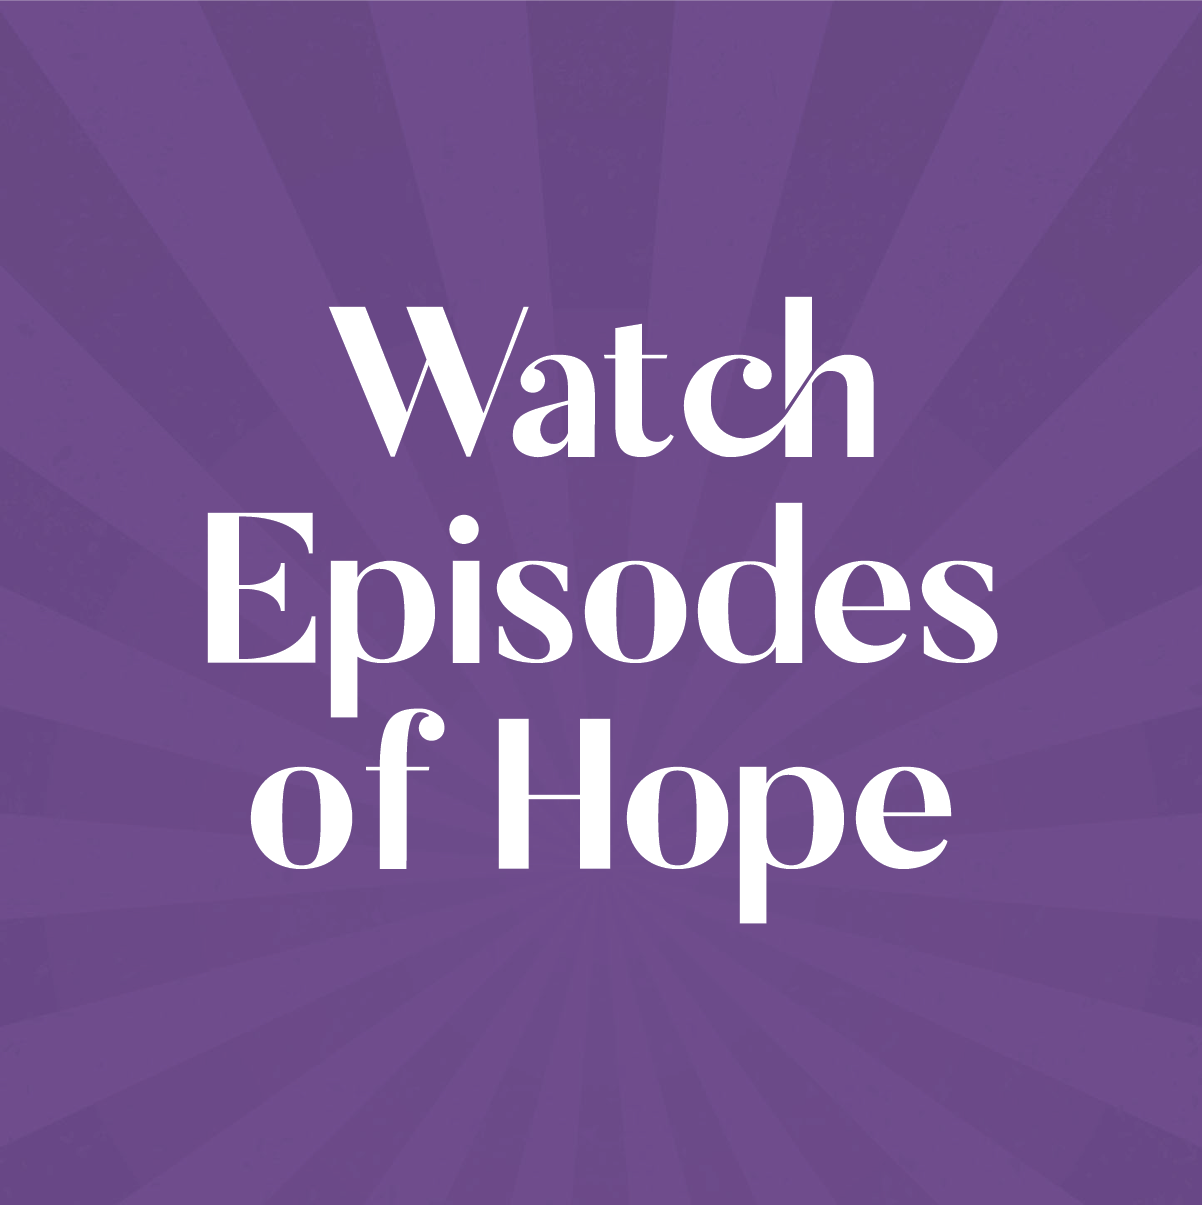 Watch Episodes of Hope